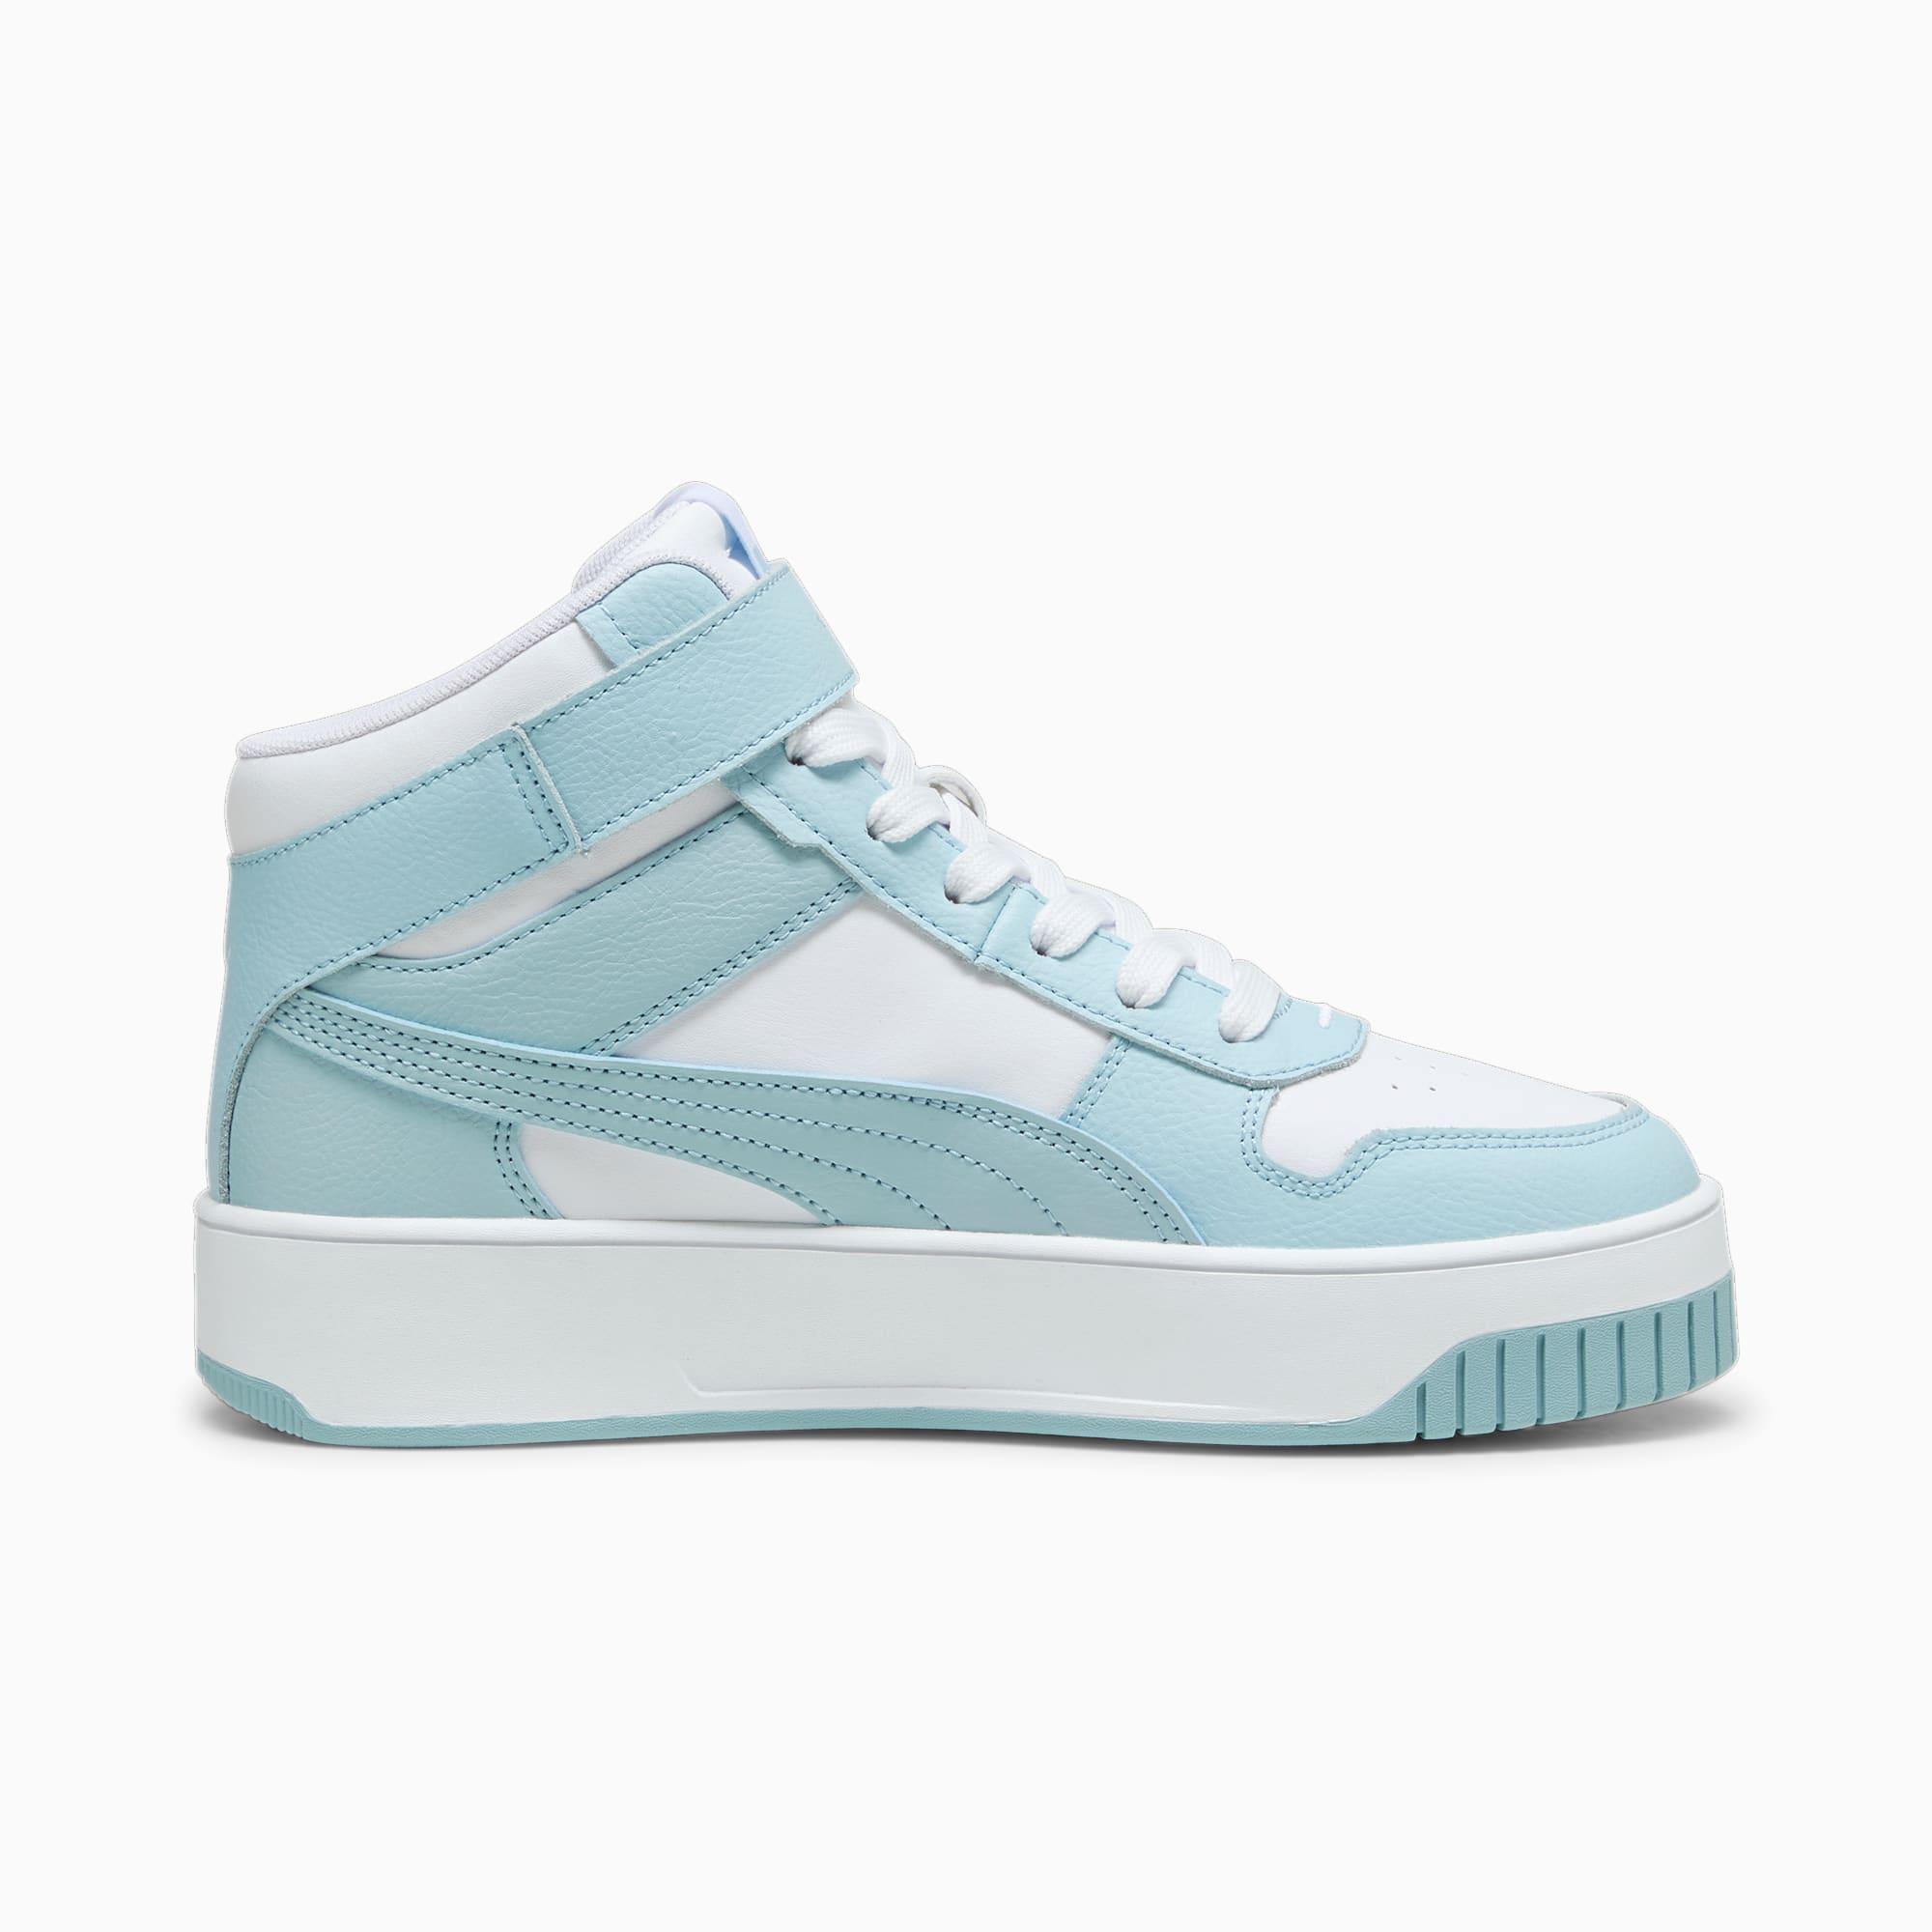 PUMA Carina Street Mid Women's Sneakers, White/Turquoise Surf, Size 42,5, Shoes